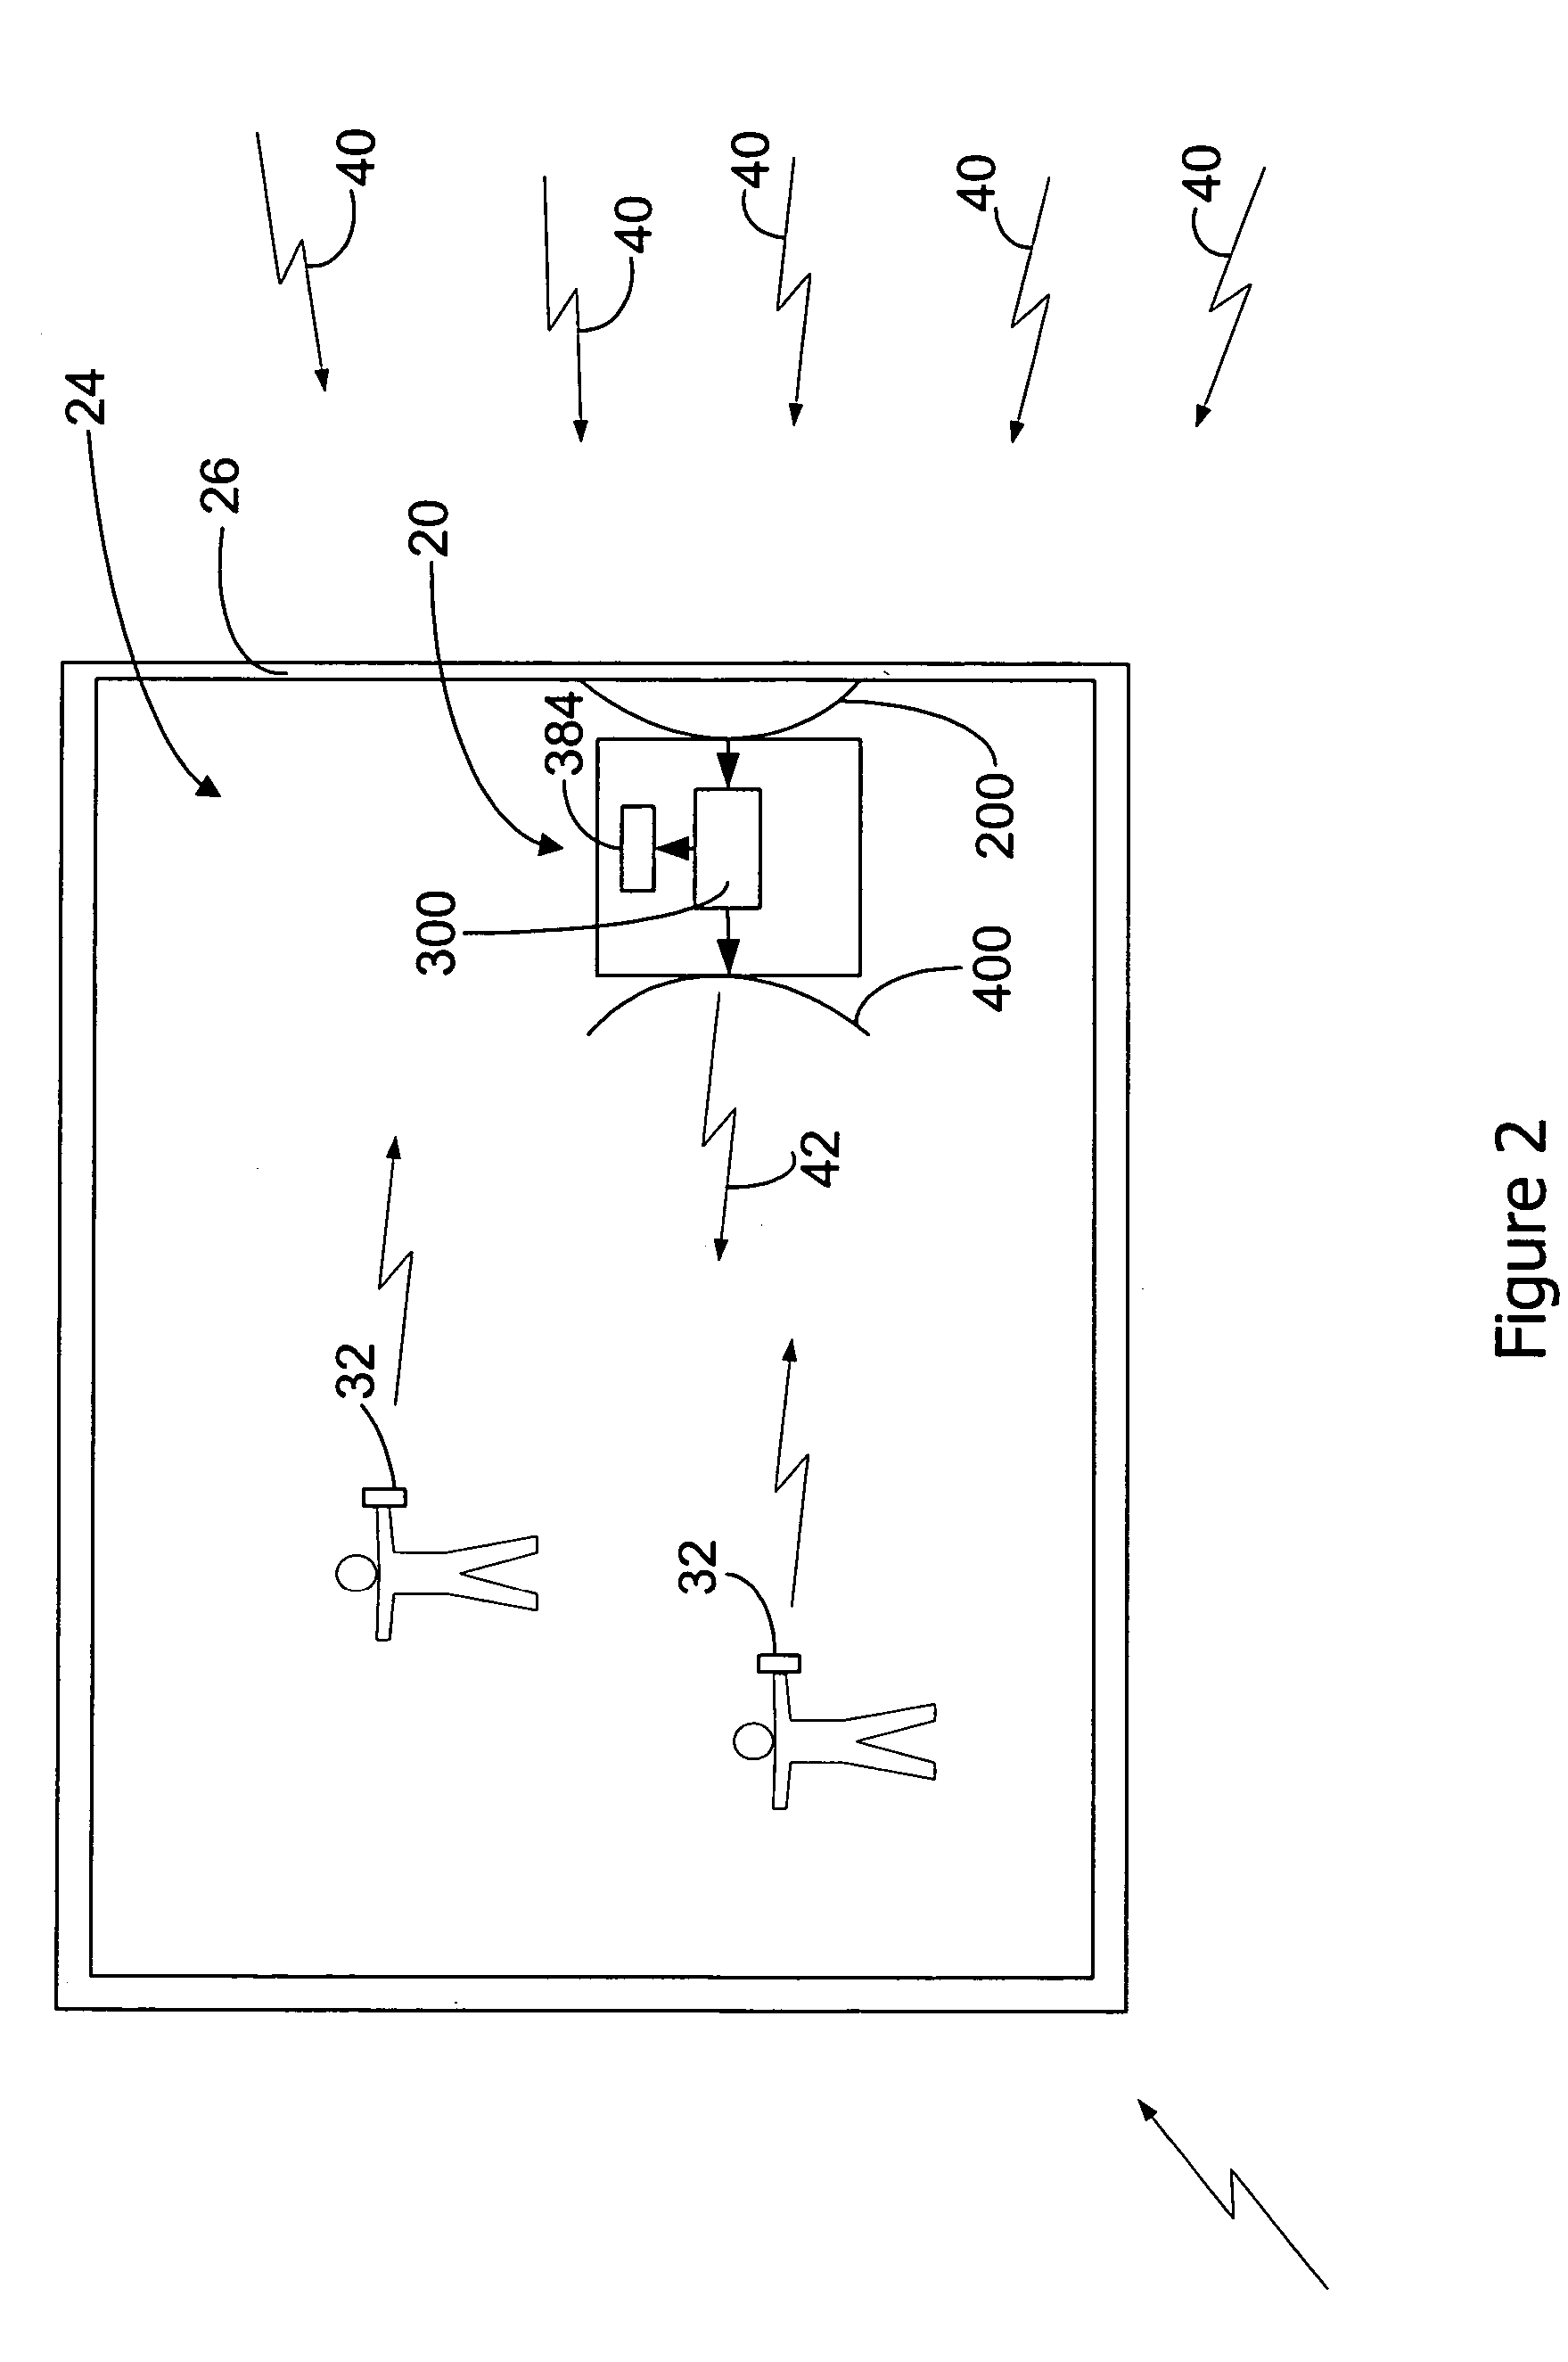 Repeater system for strong signal environments